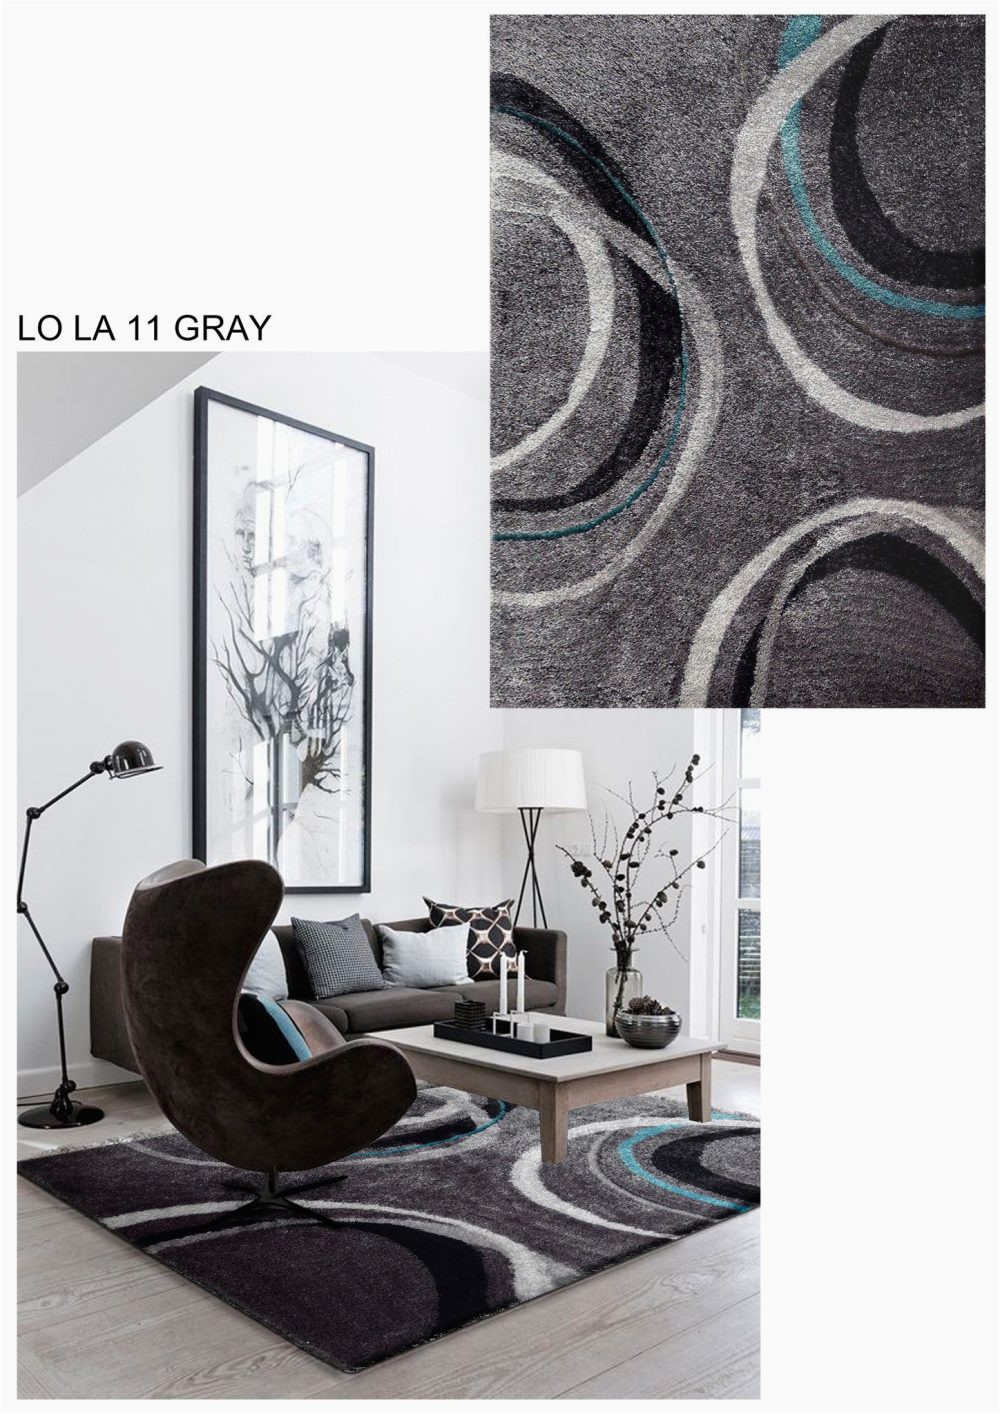 Area Rugs with Grey and Turquoise Lola Shag Grey Turquoise area Rug